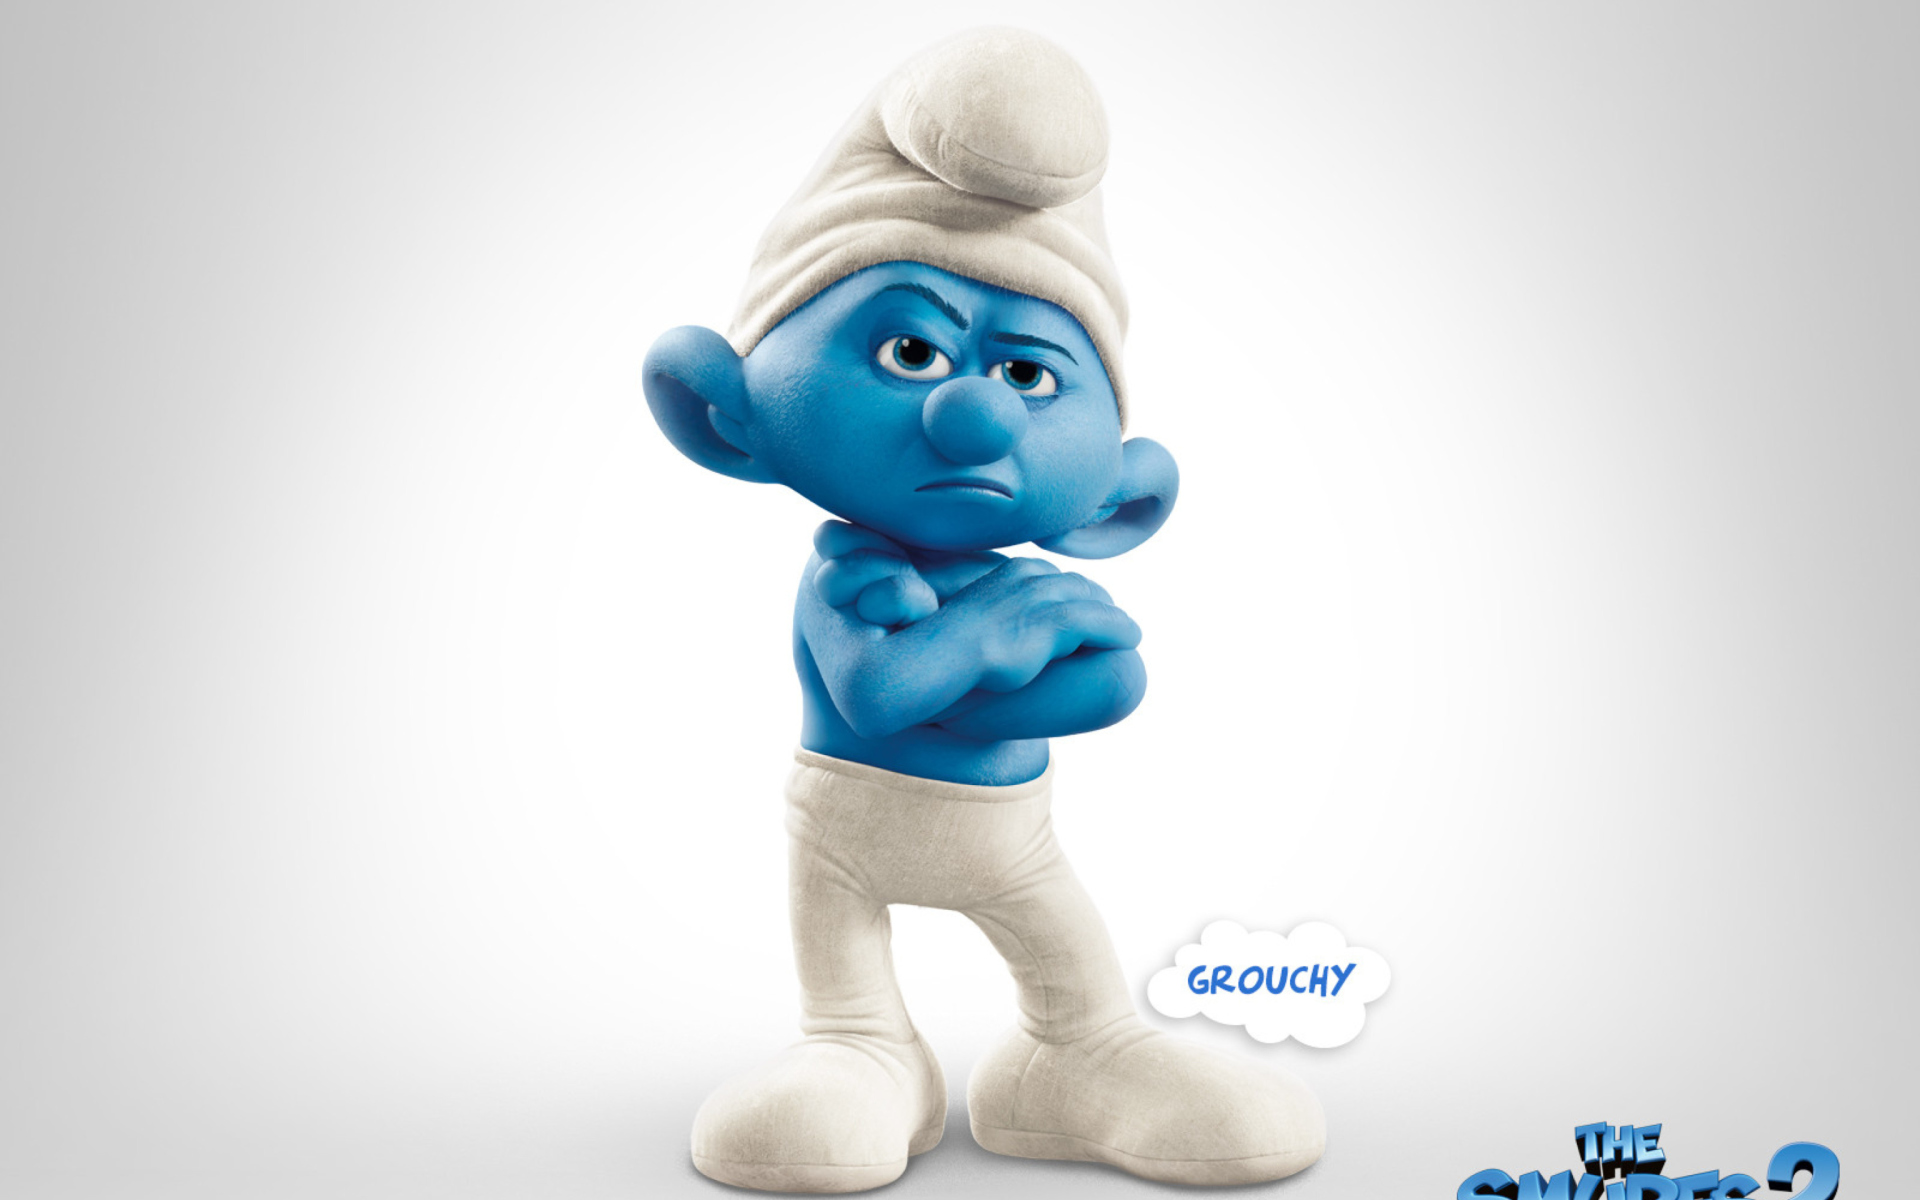 Grouchy The Smurfs 2 wallpaper 1920x1200